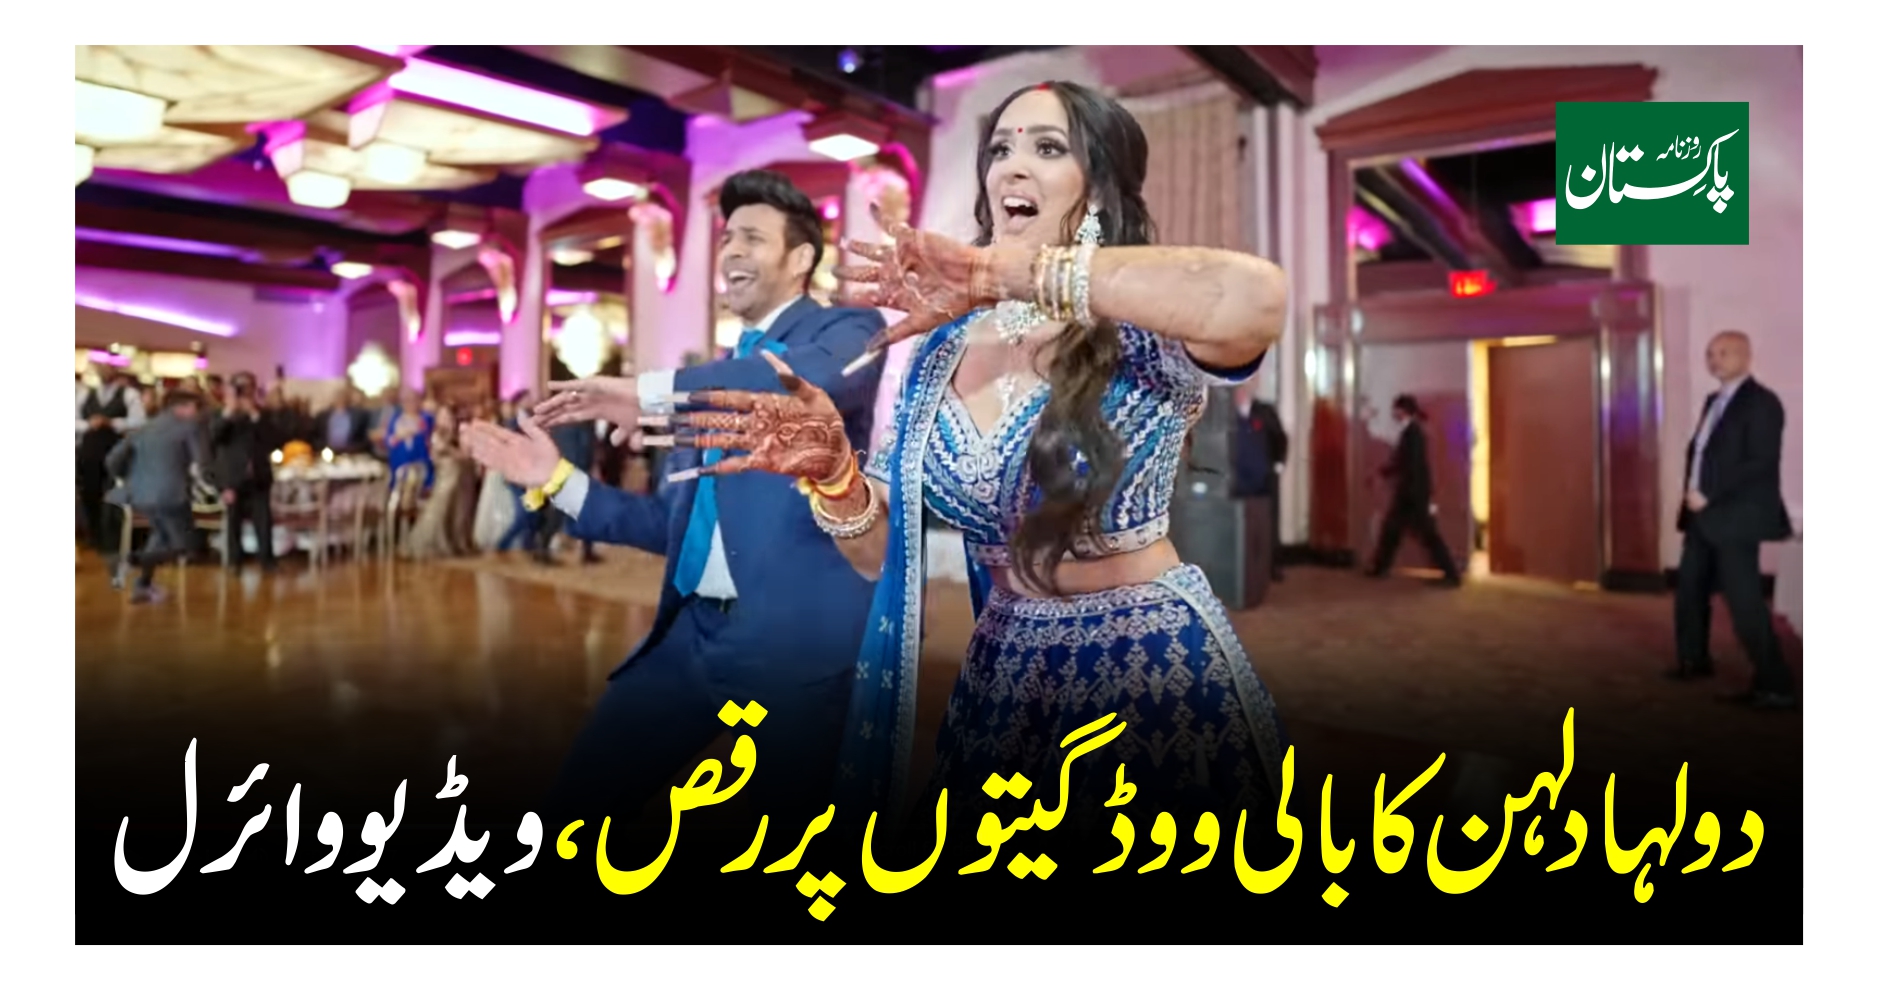 Video of the bride and groom dancing to Bollywood songs has gone viral

 | Pro IQRA News